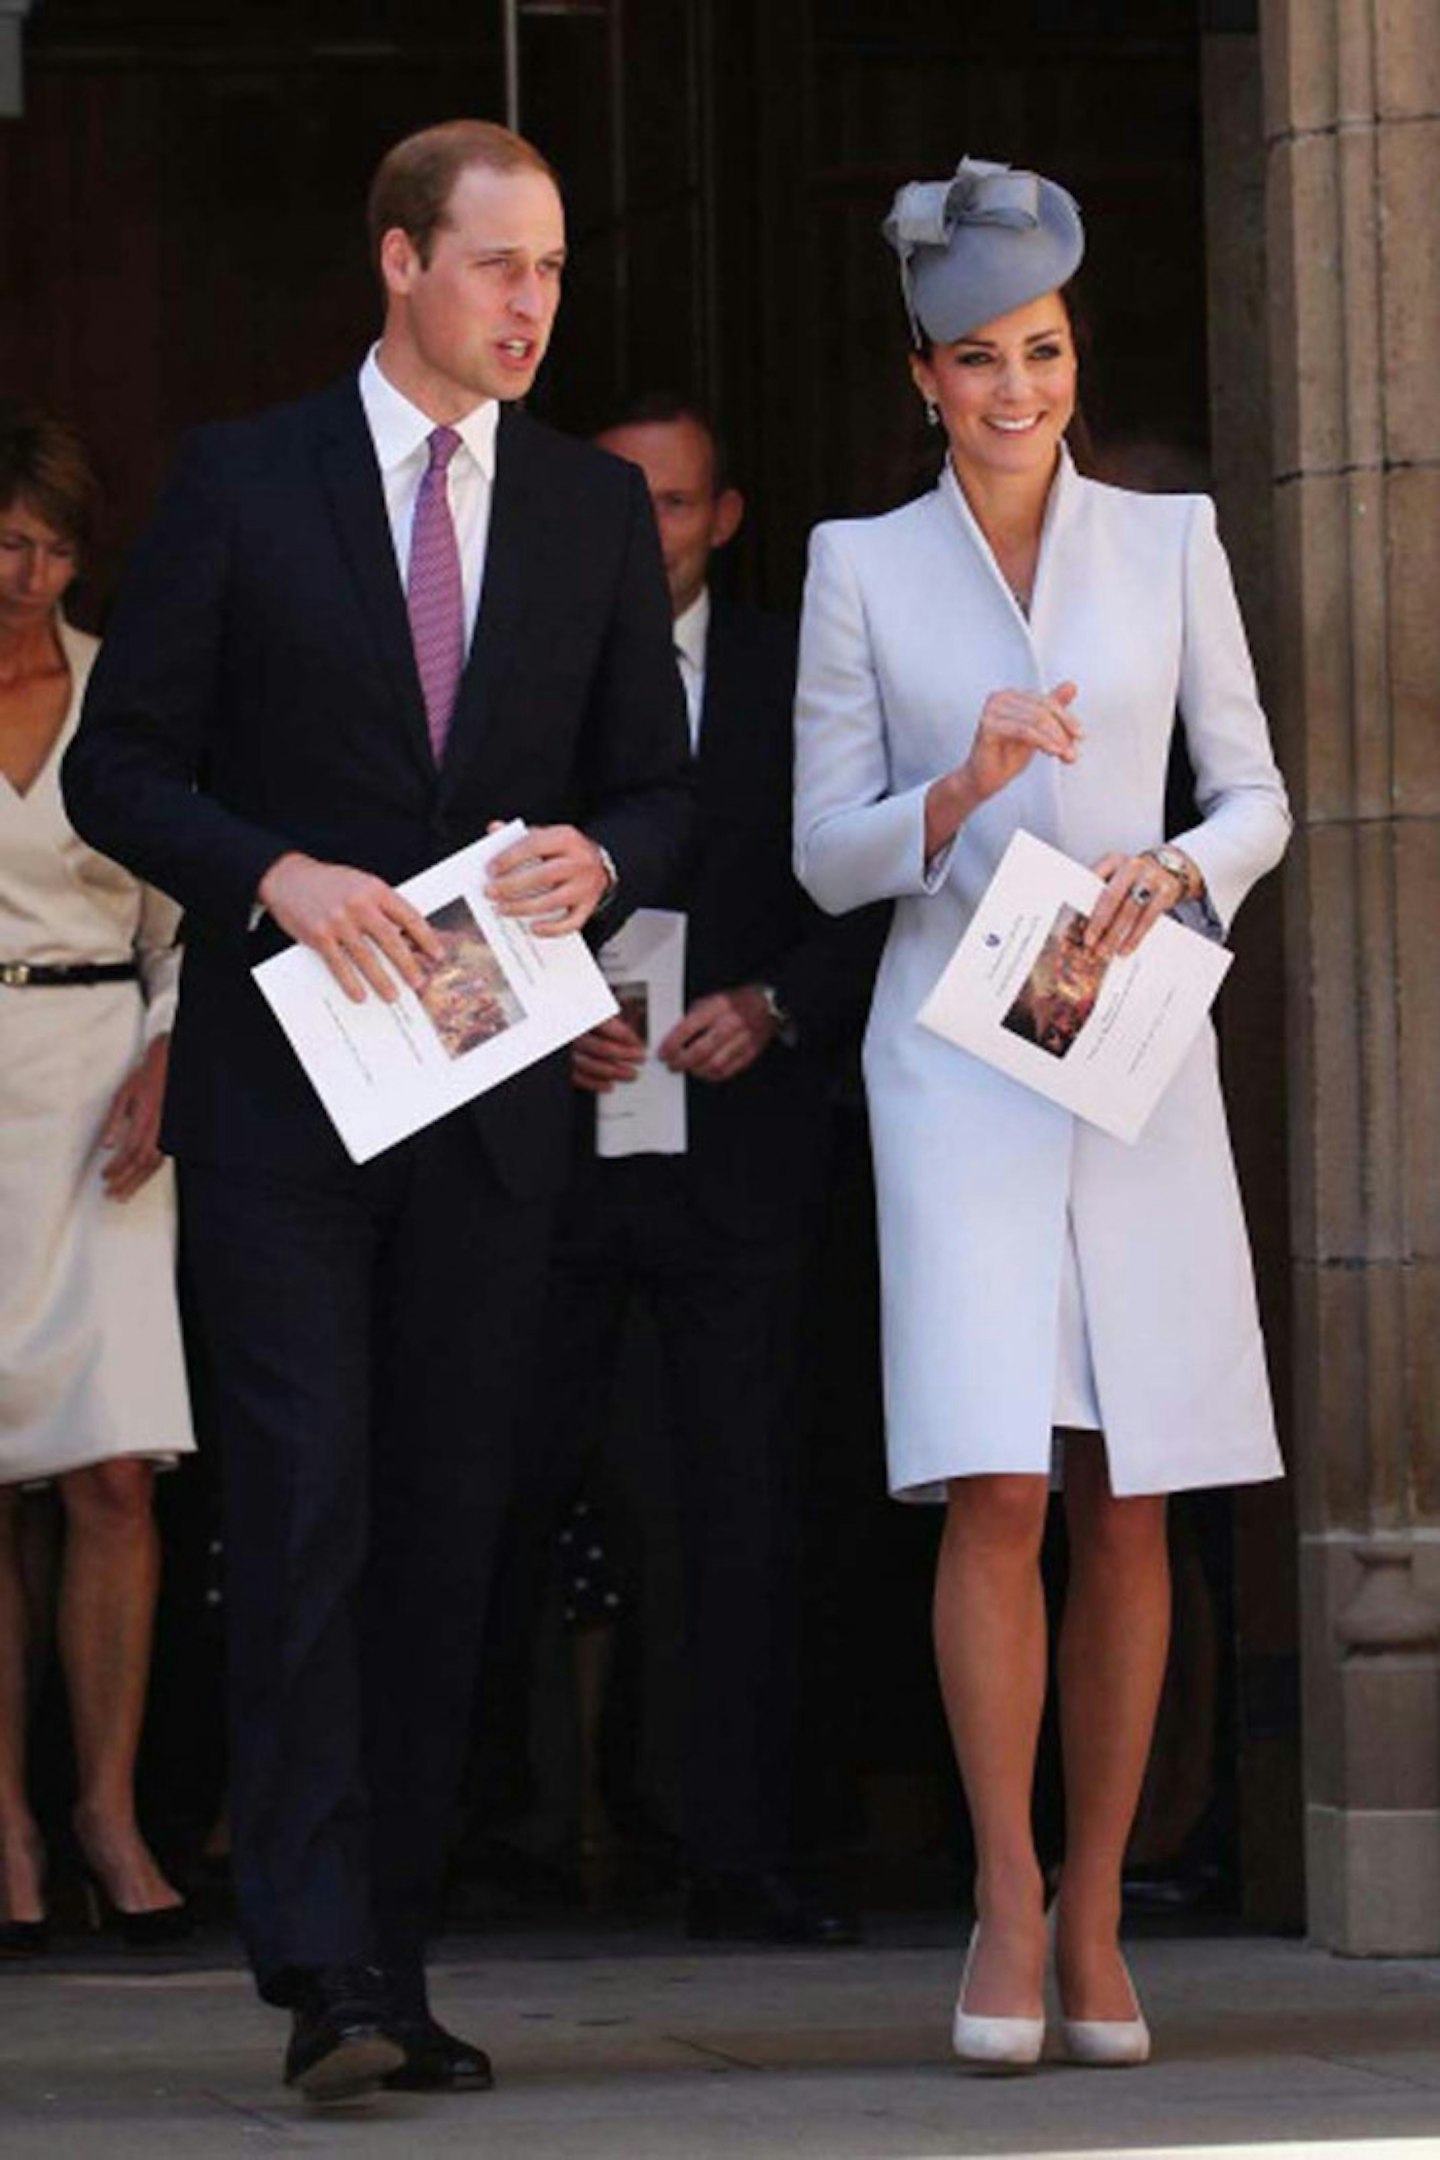 The Duchess of Cambridge in Alexander McQueen at Easter service, Australia, 20 April 2014